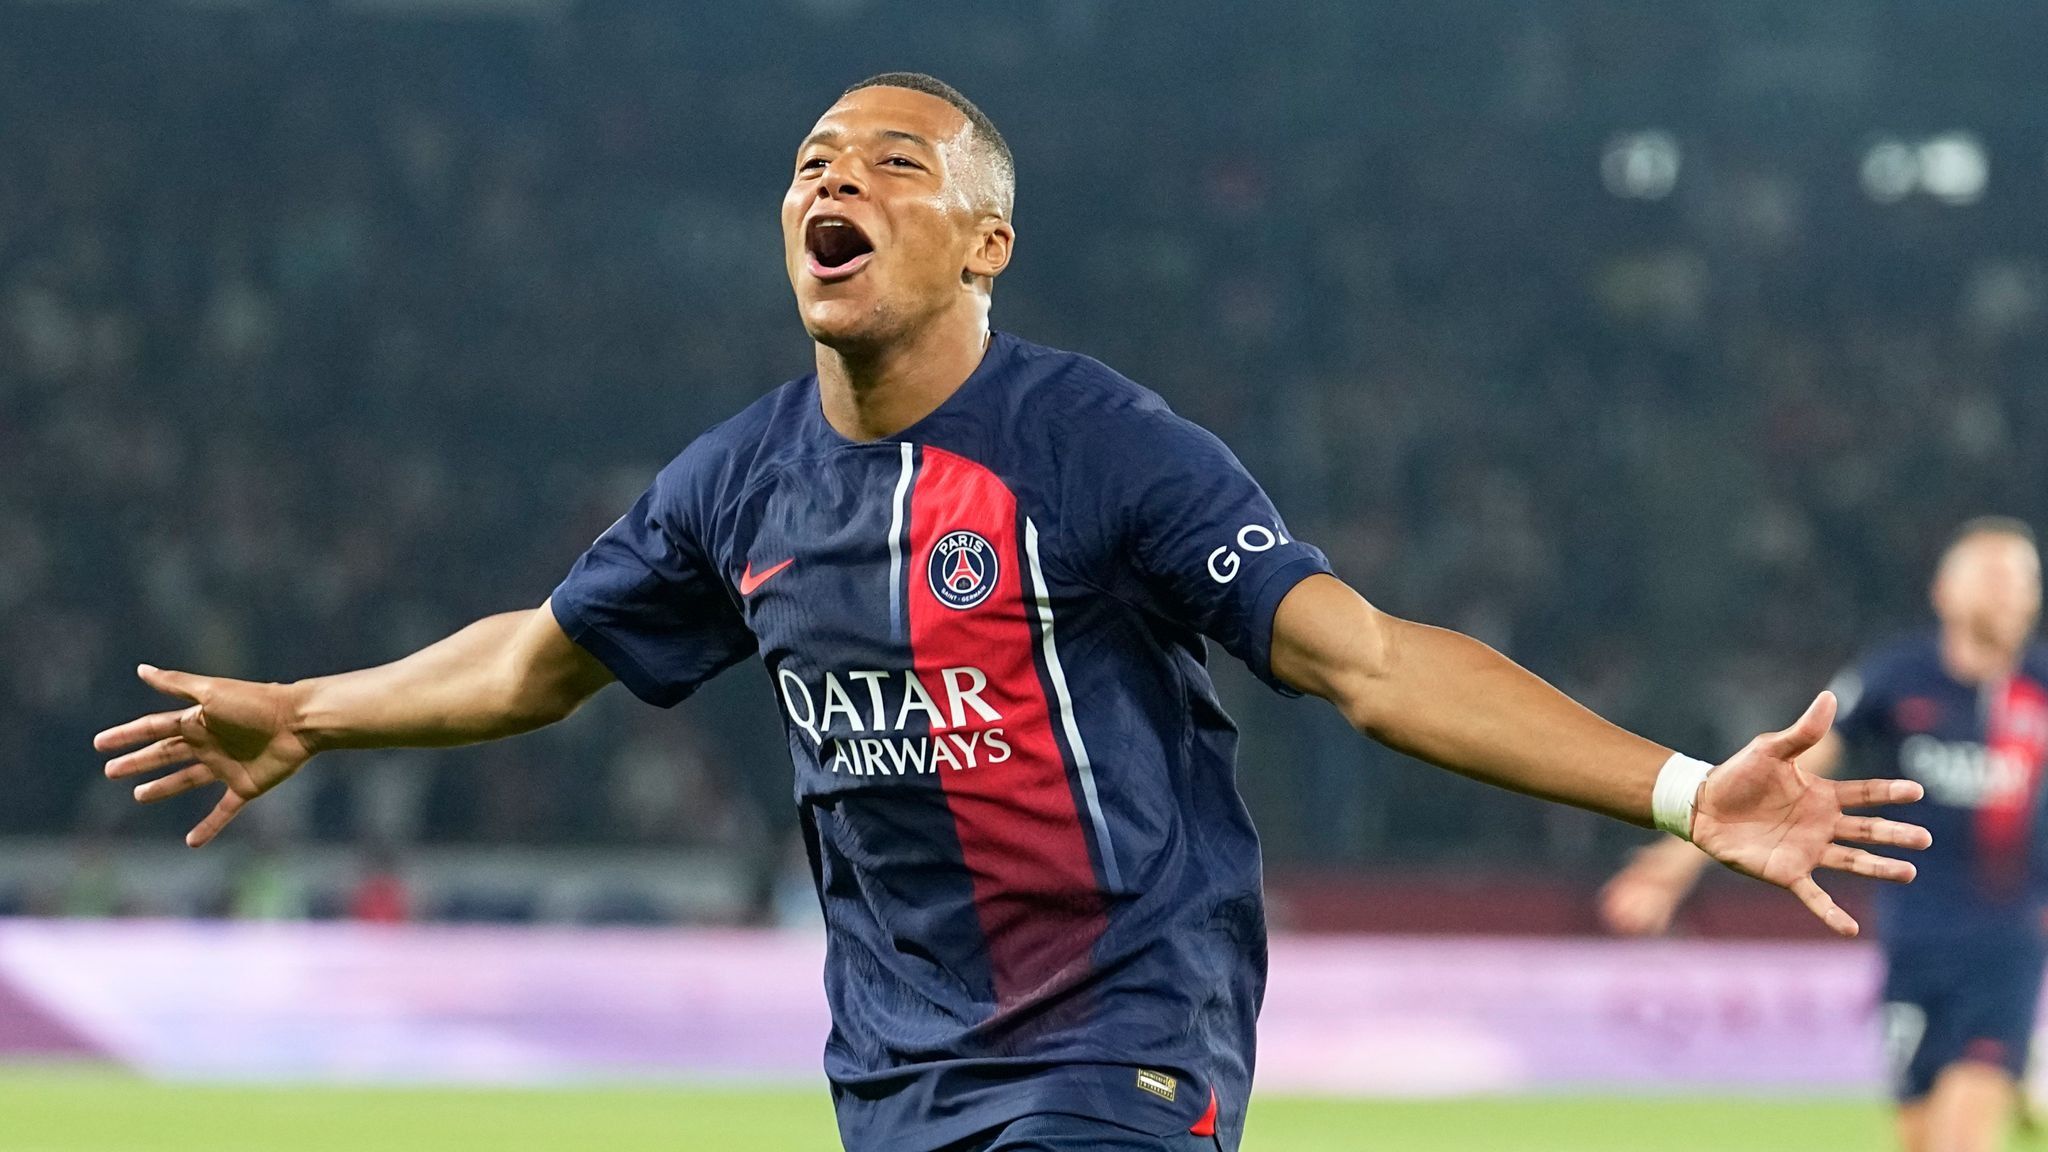 Mbappe Equals Shevchenko And Ibrahimovic In Champions League Goal Tally